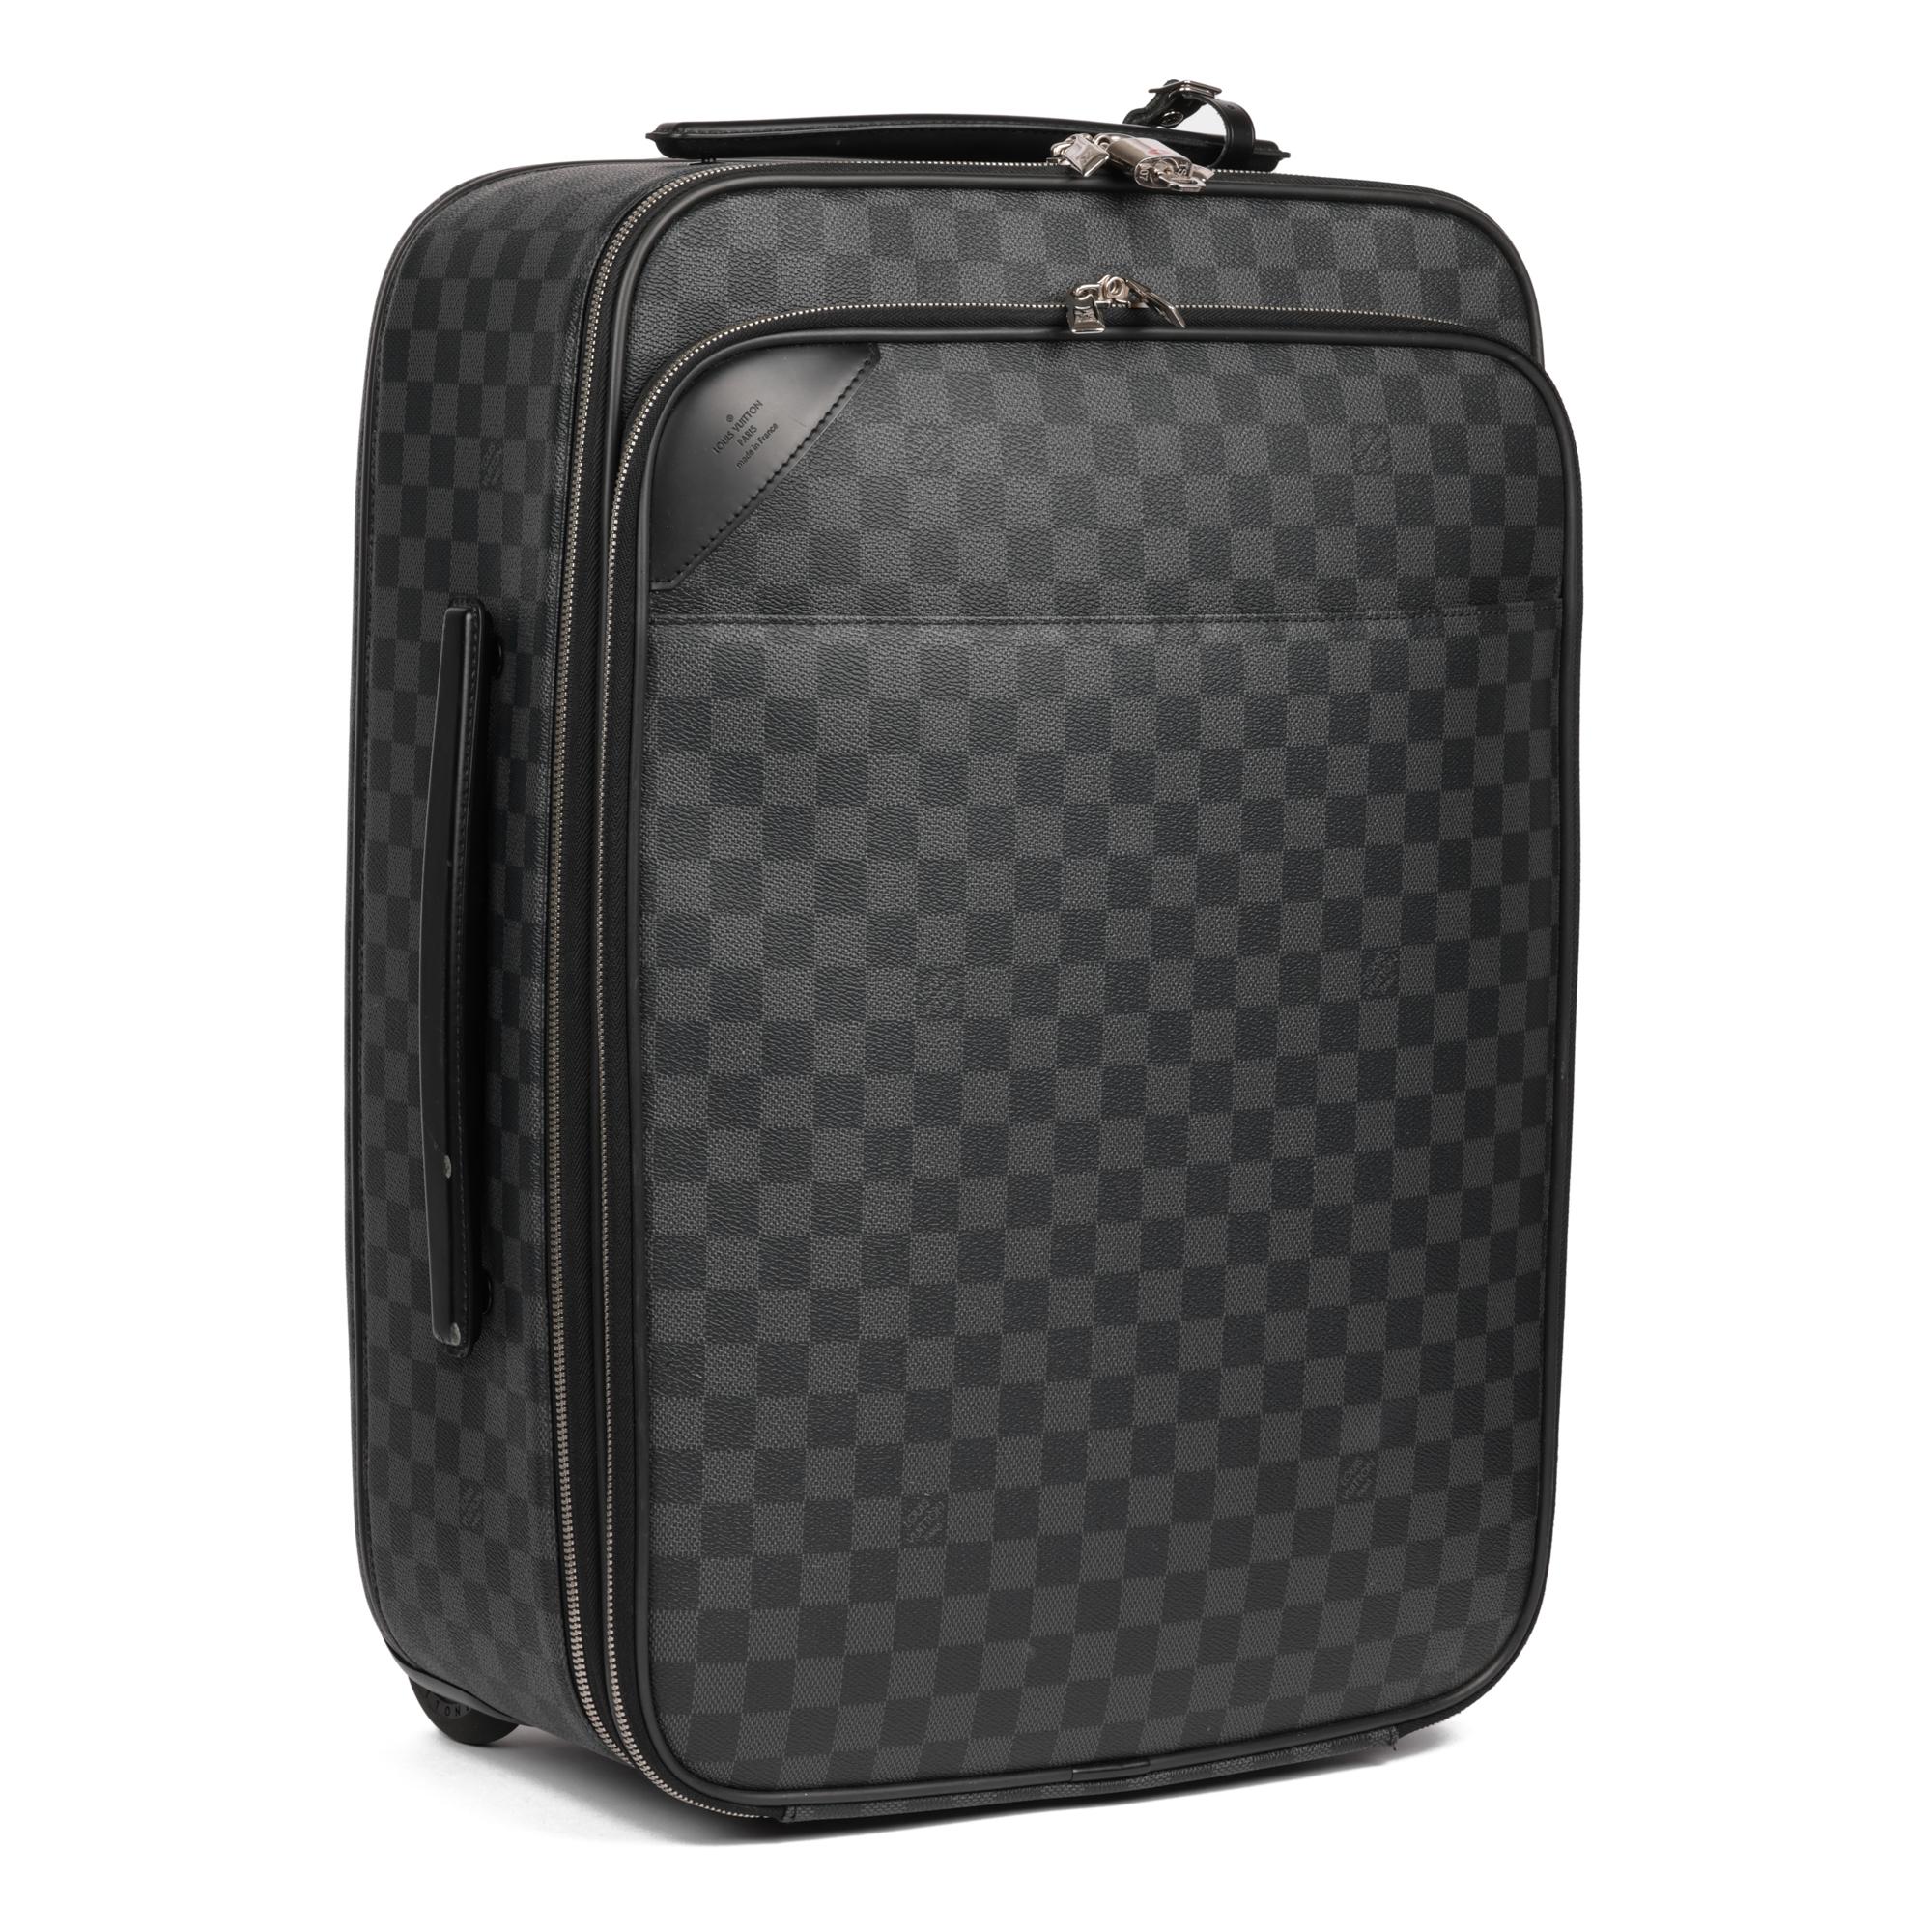 LOUIS VUITTON
Damier Graphite Coated Canvas & Black Calfskin Leather Pegase 55

Xupes Reference: HB5093
Serial Number: DR 2176
Age (Circa): 2016
Accompanied By: Louis Vuitton Invoice, Care Booklet, Padlock, Key, Luggage Tag
Gender: Unisex
Type: